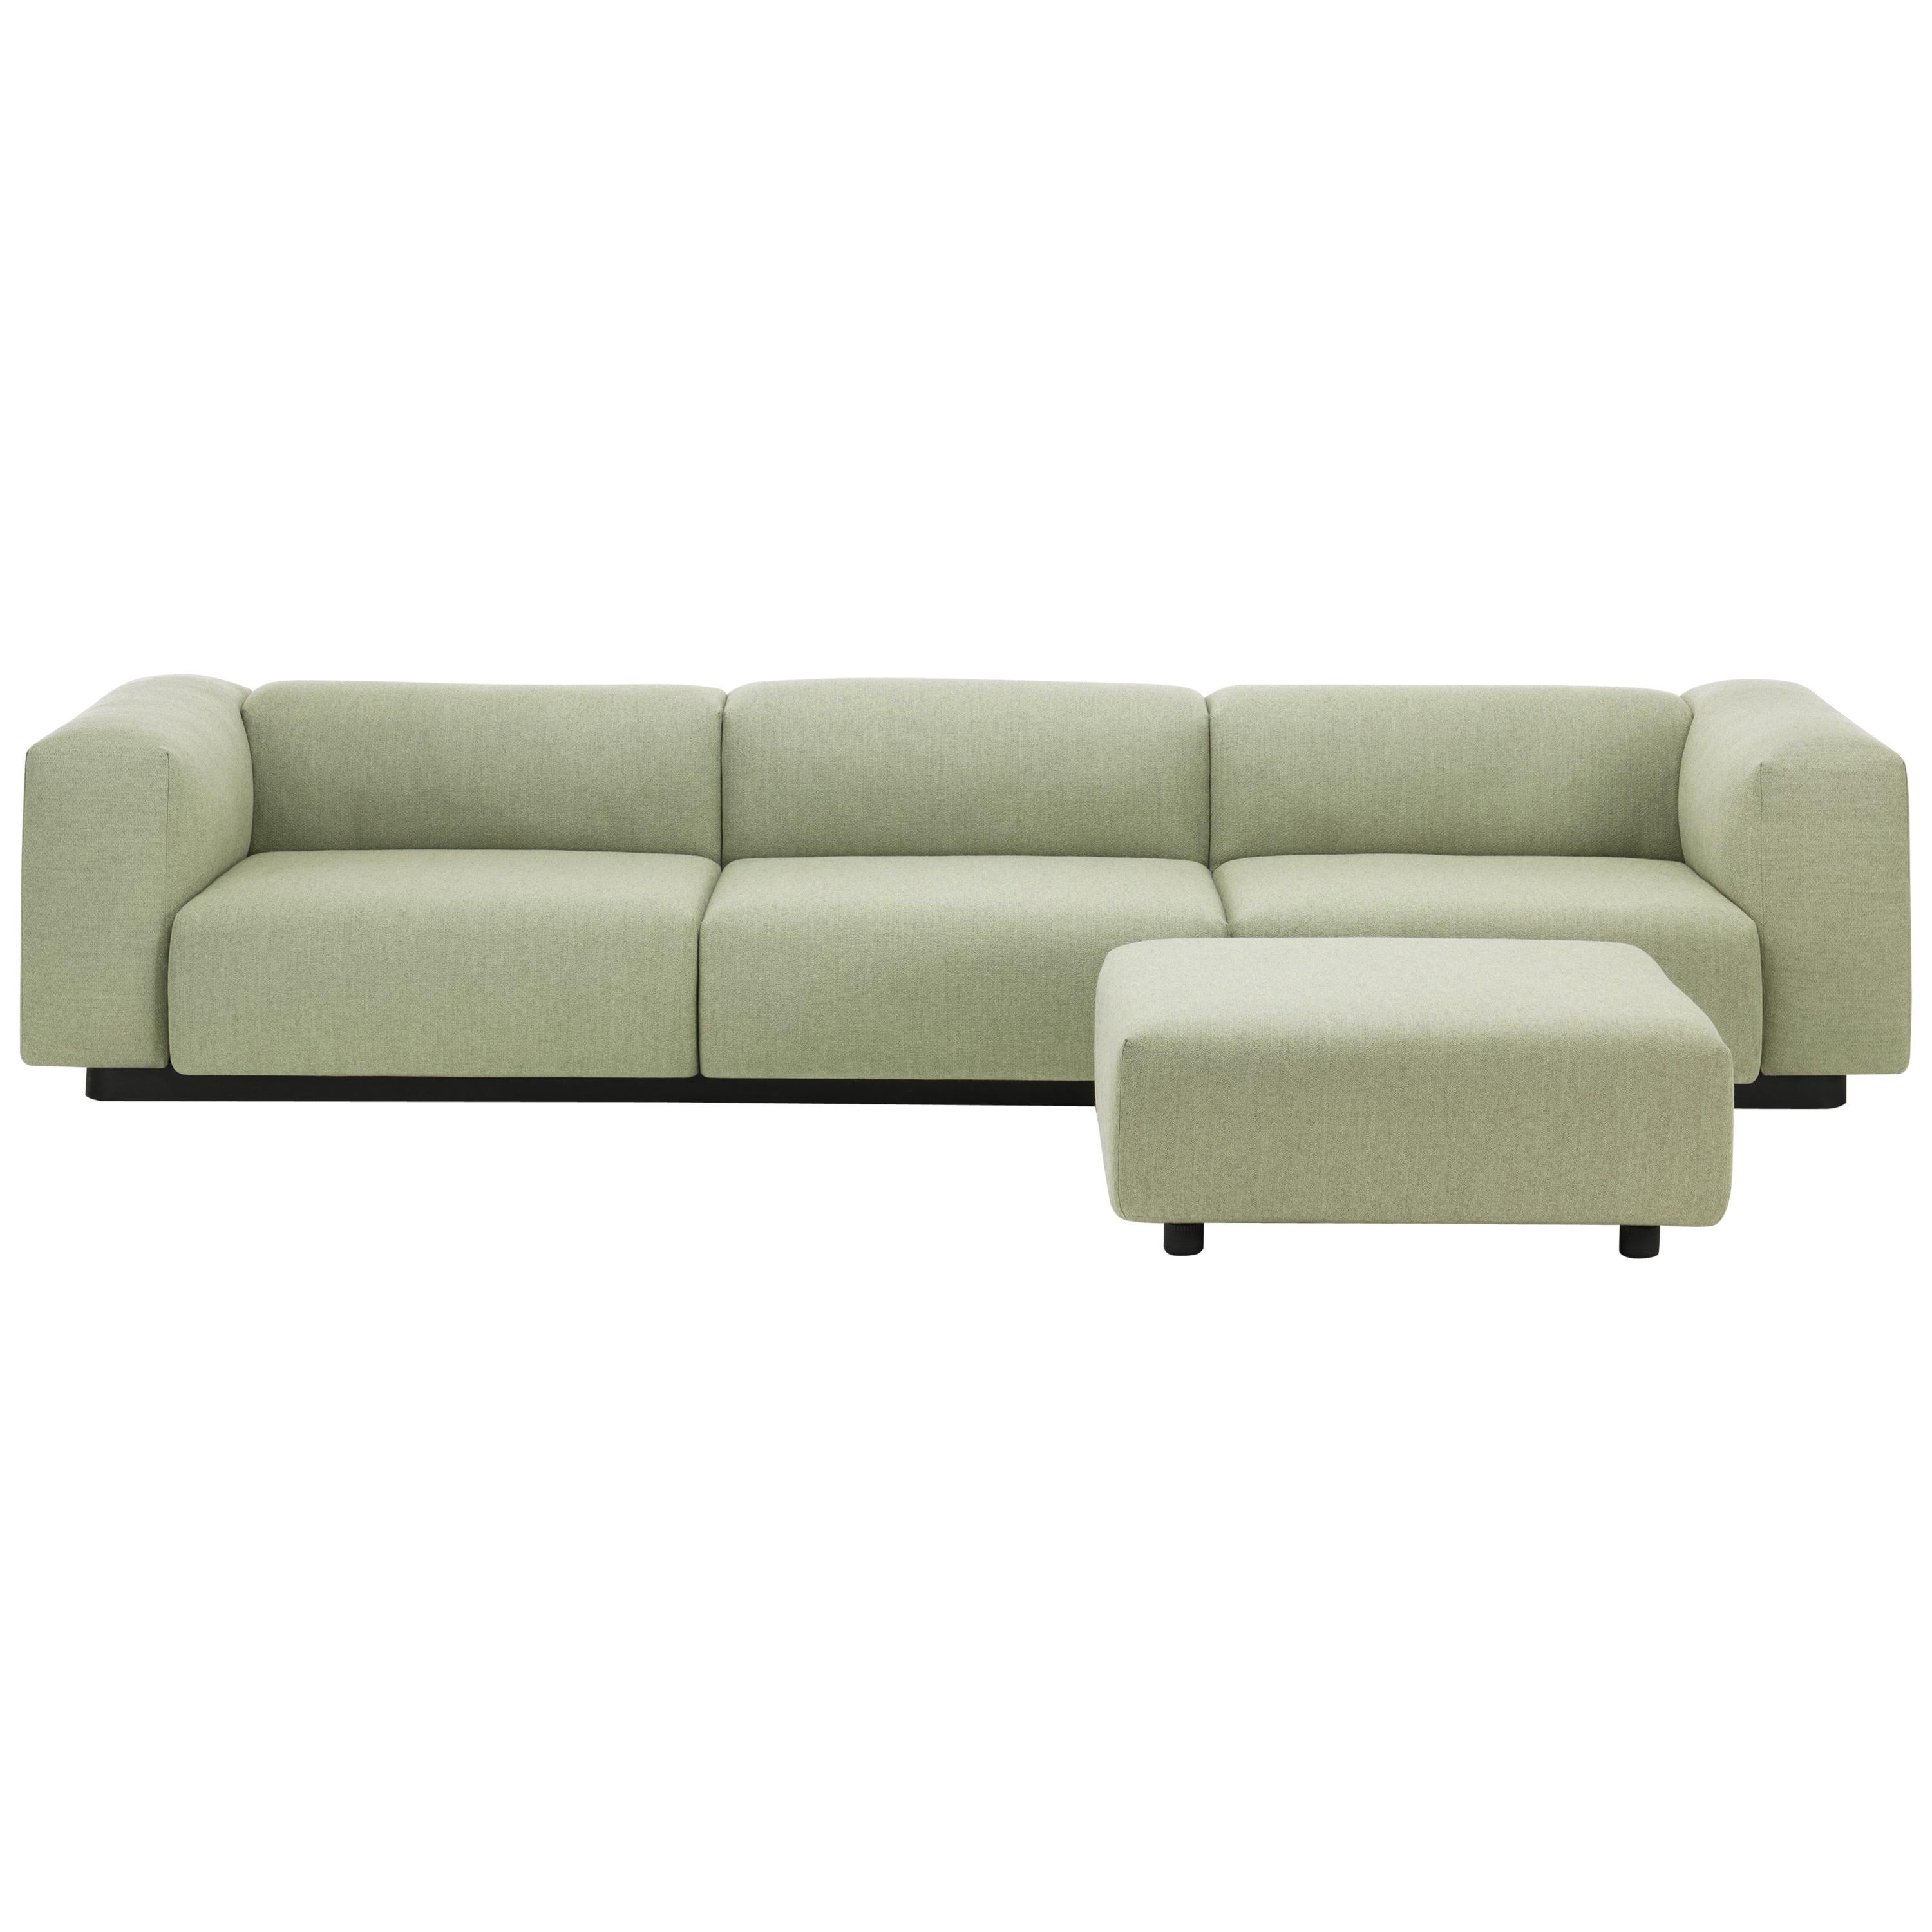 Vitra Soft Modular Sofa with Ottoman in Sage & Pebble Dumet by Jasper Morrison For Sale